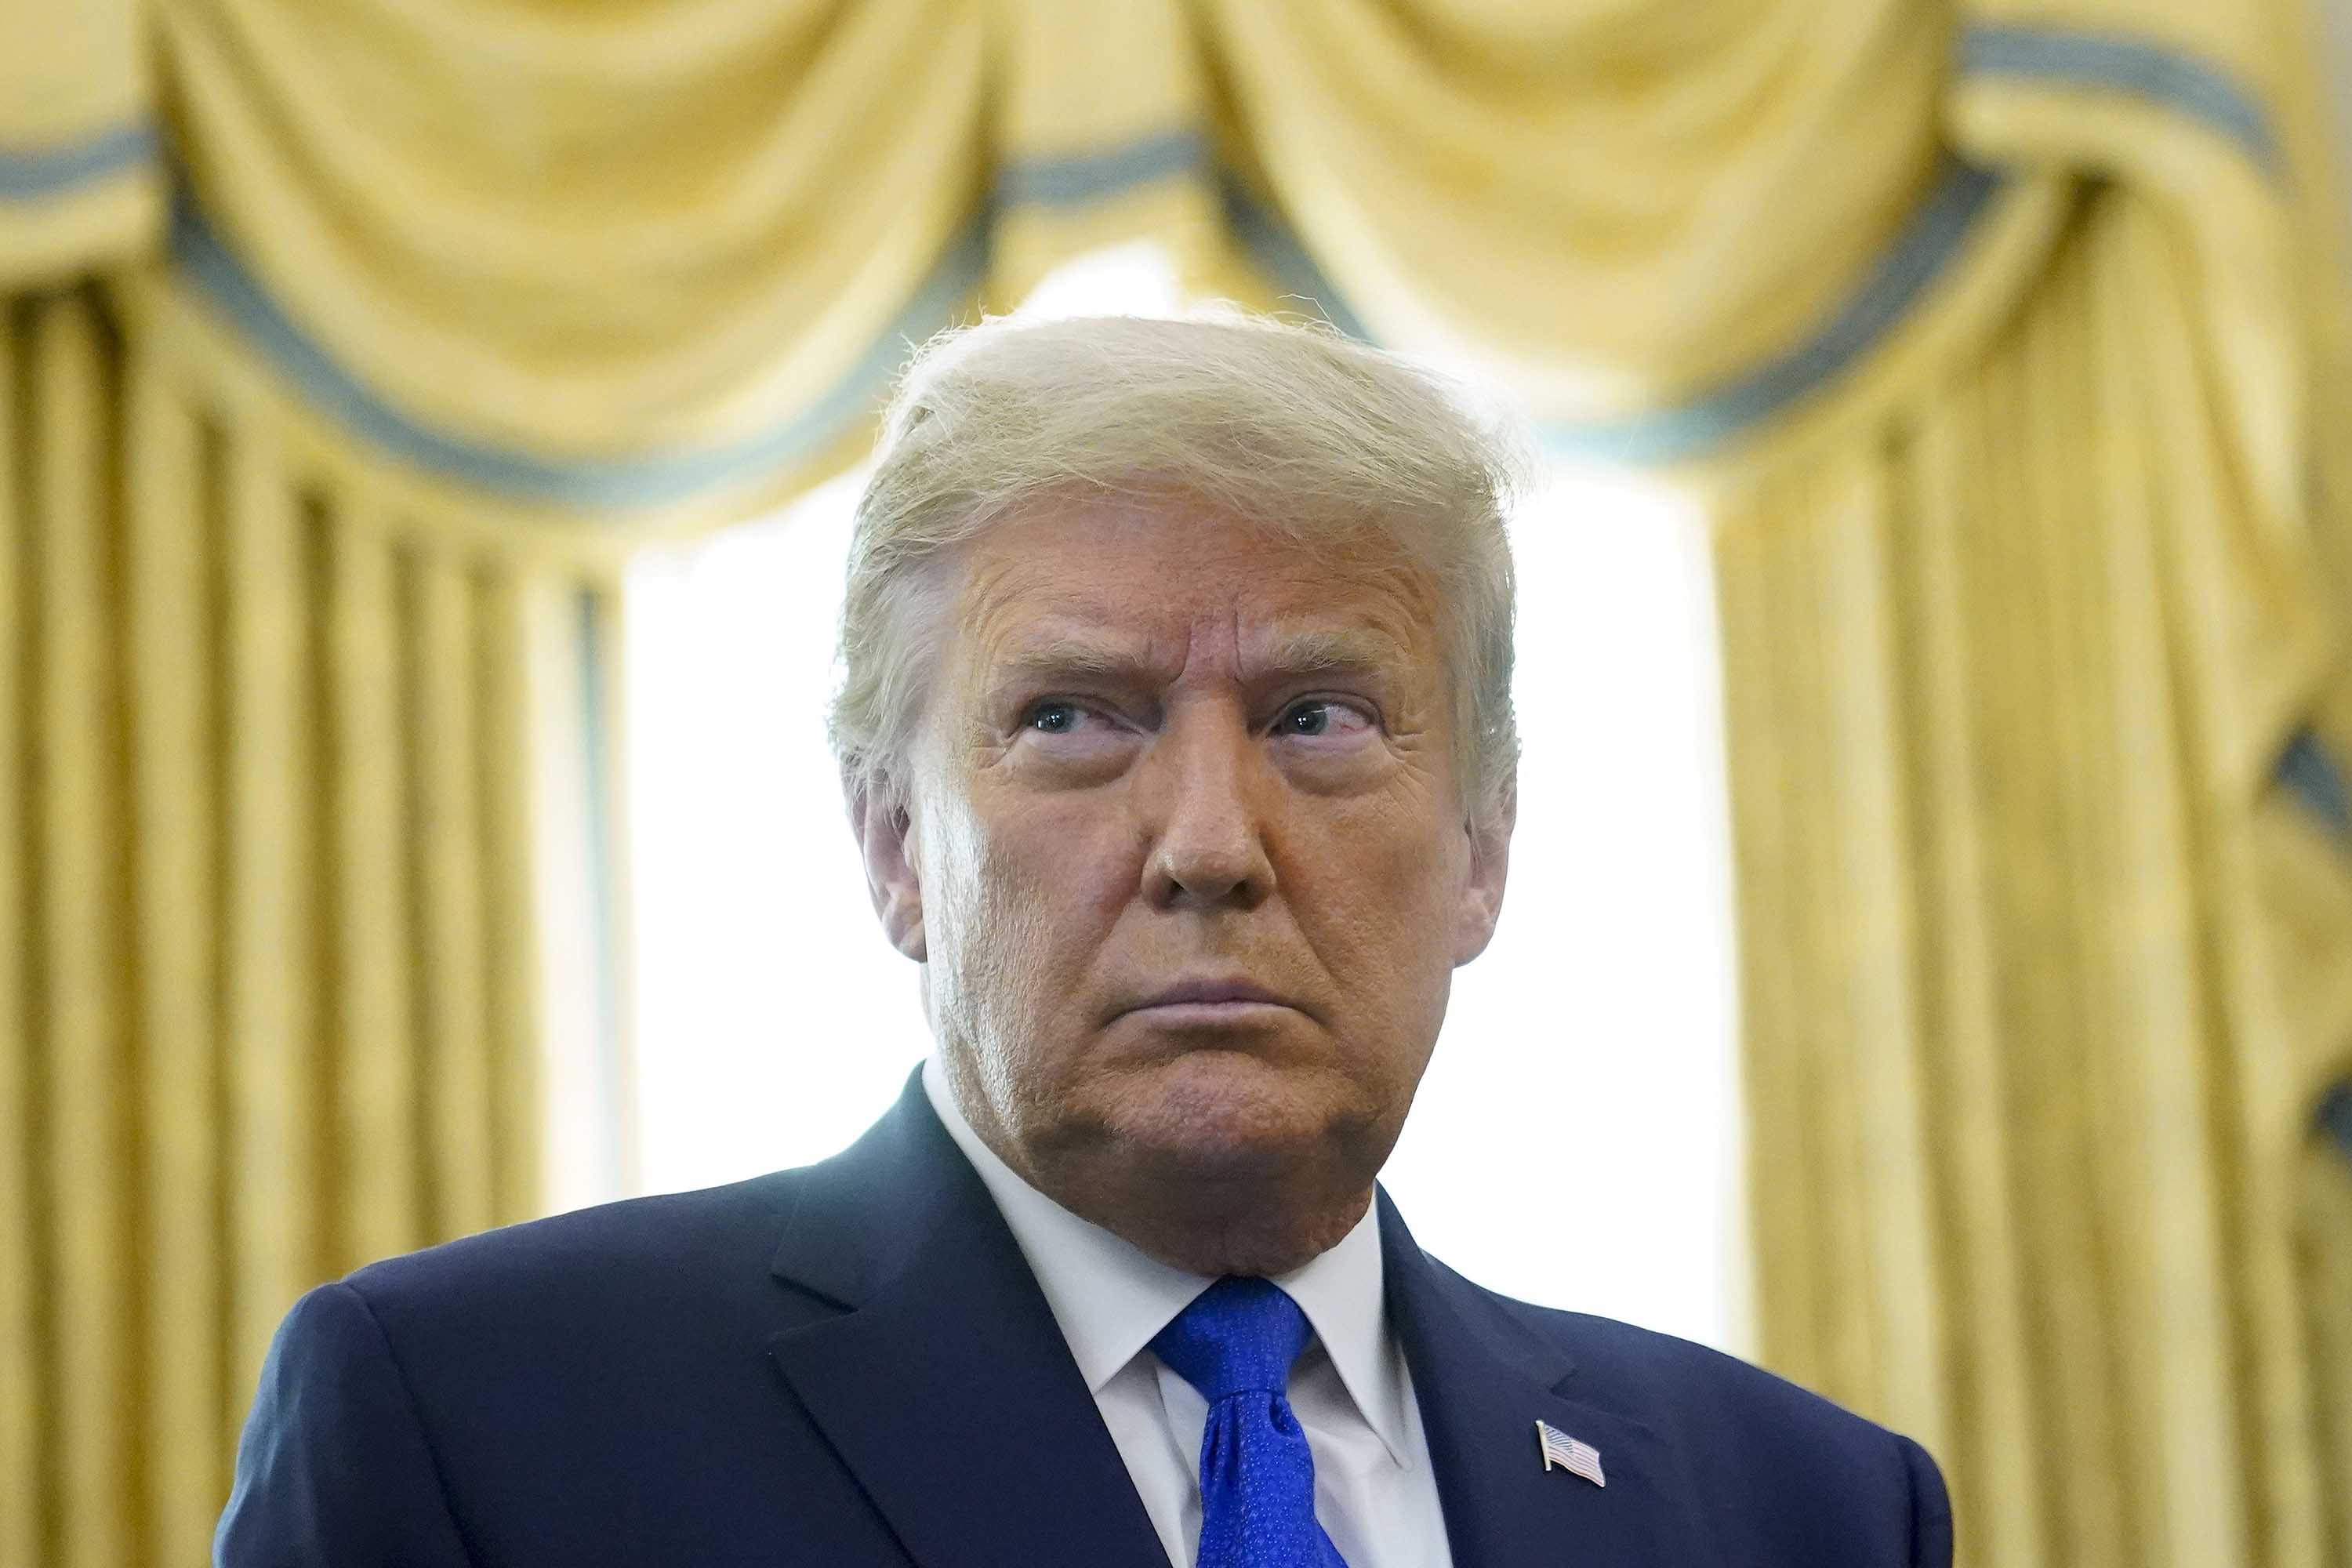 President Donald Trump is pictured in the Oval Office of the White House in Washington, DC, on December 7.